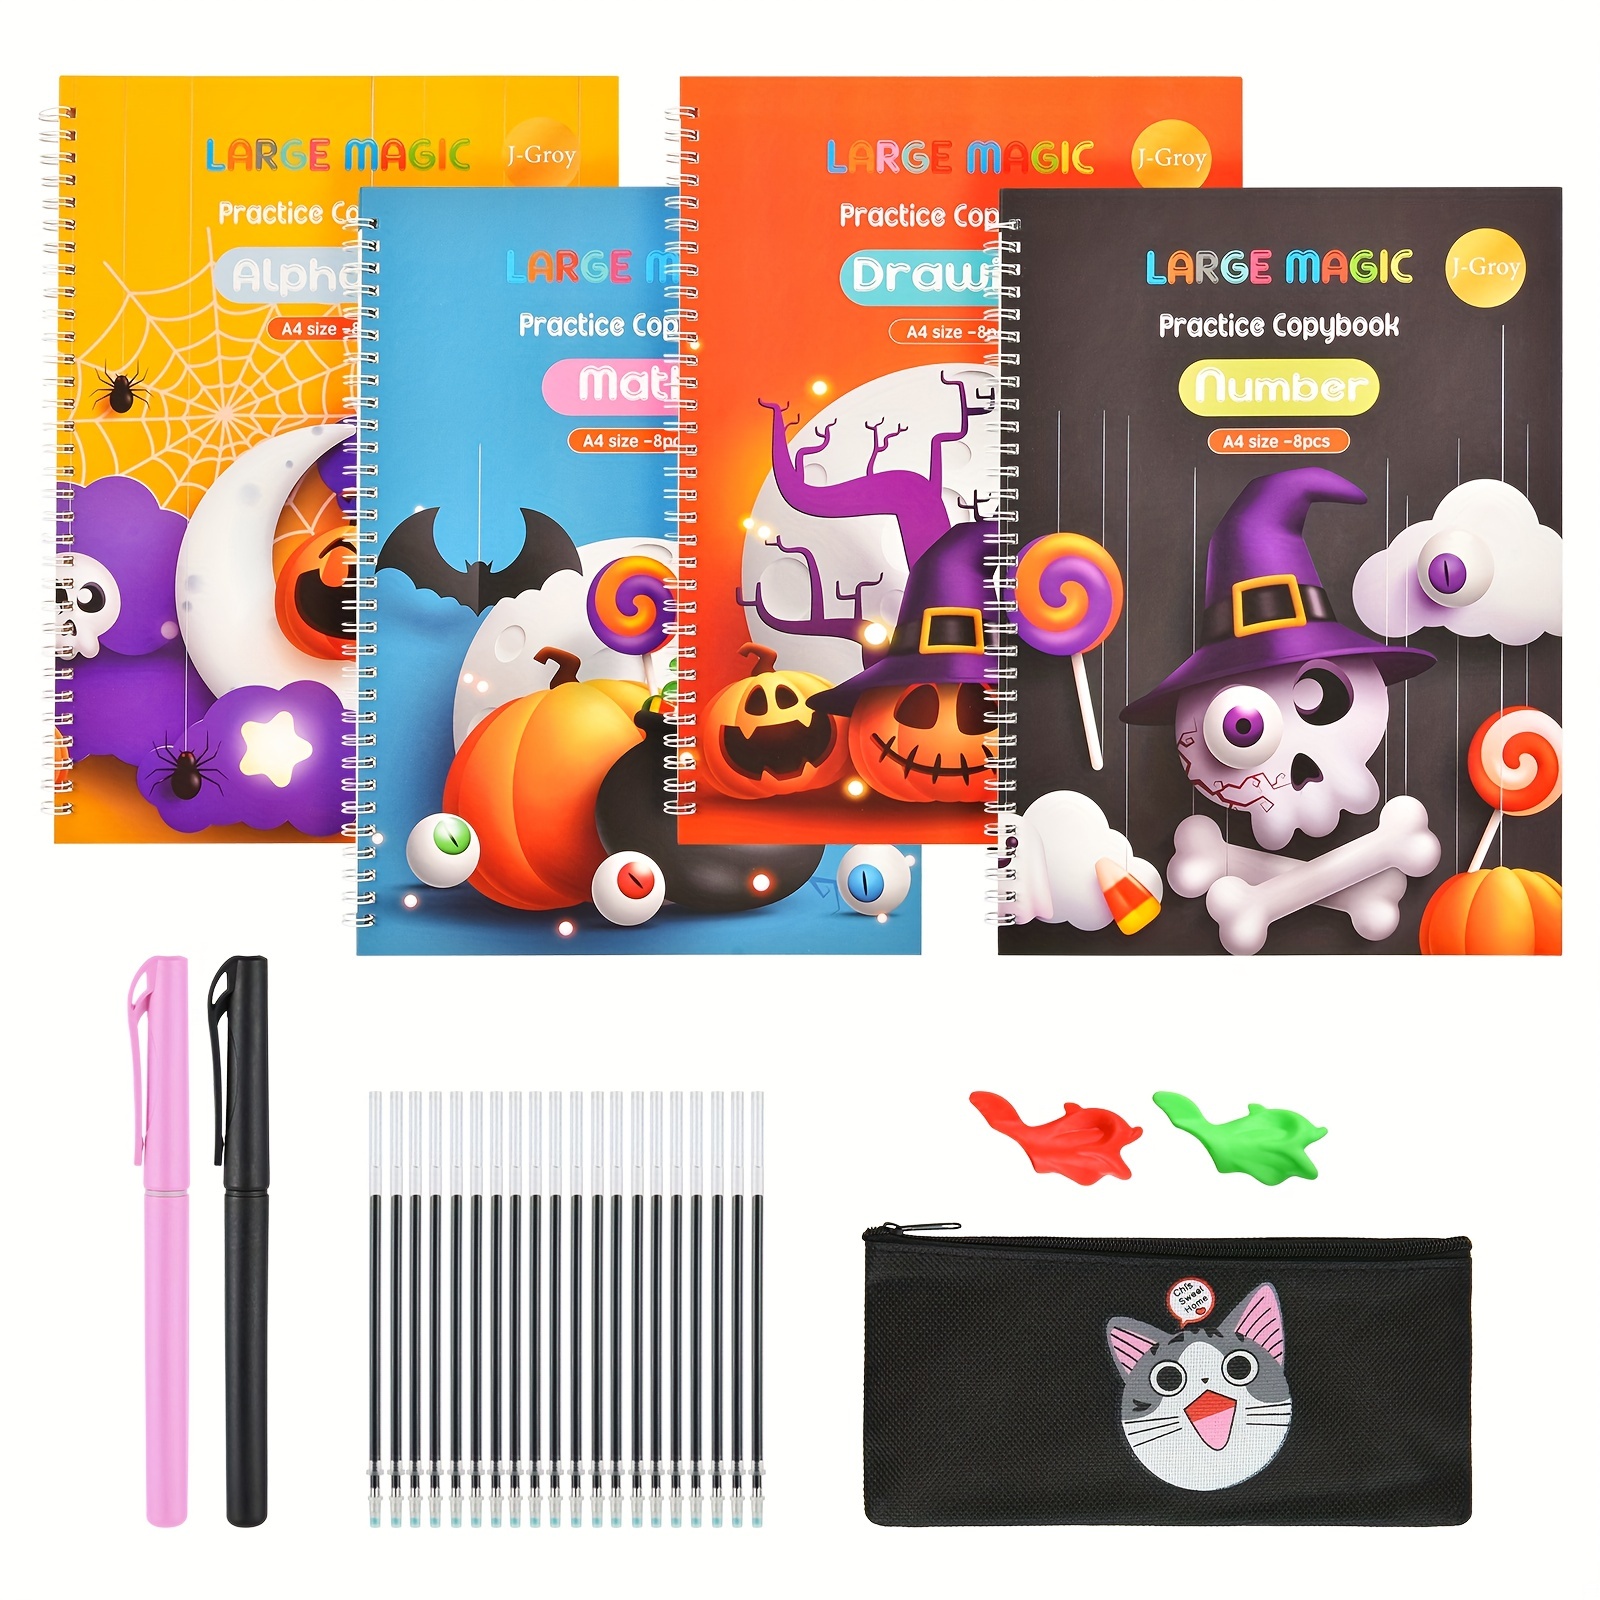 Halloween Magic Practice Copybook With Magic Pens For Students, A4